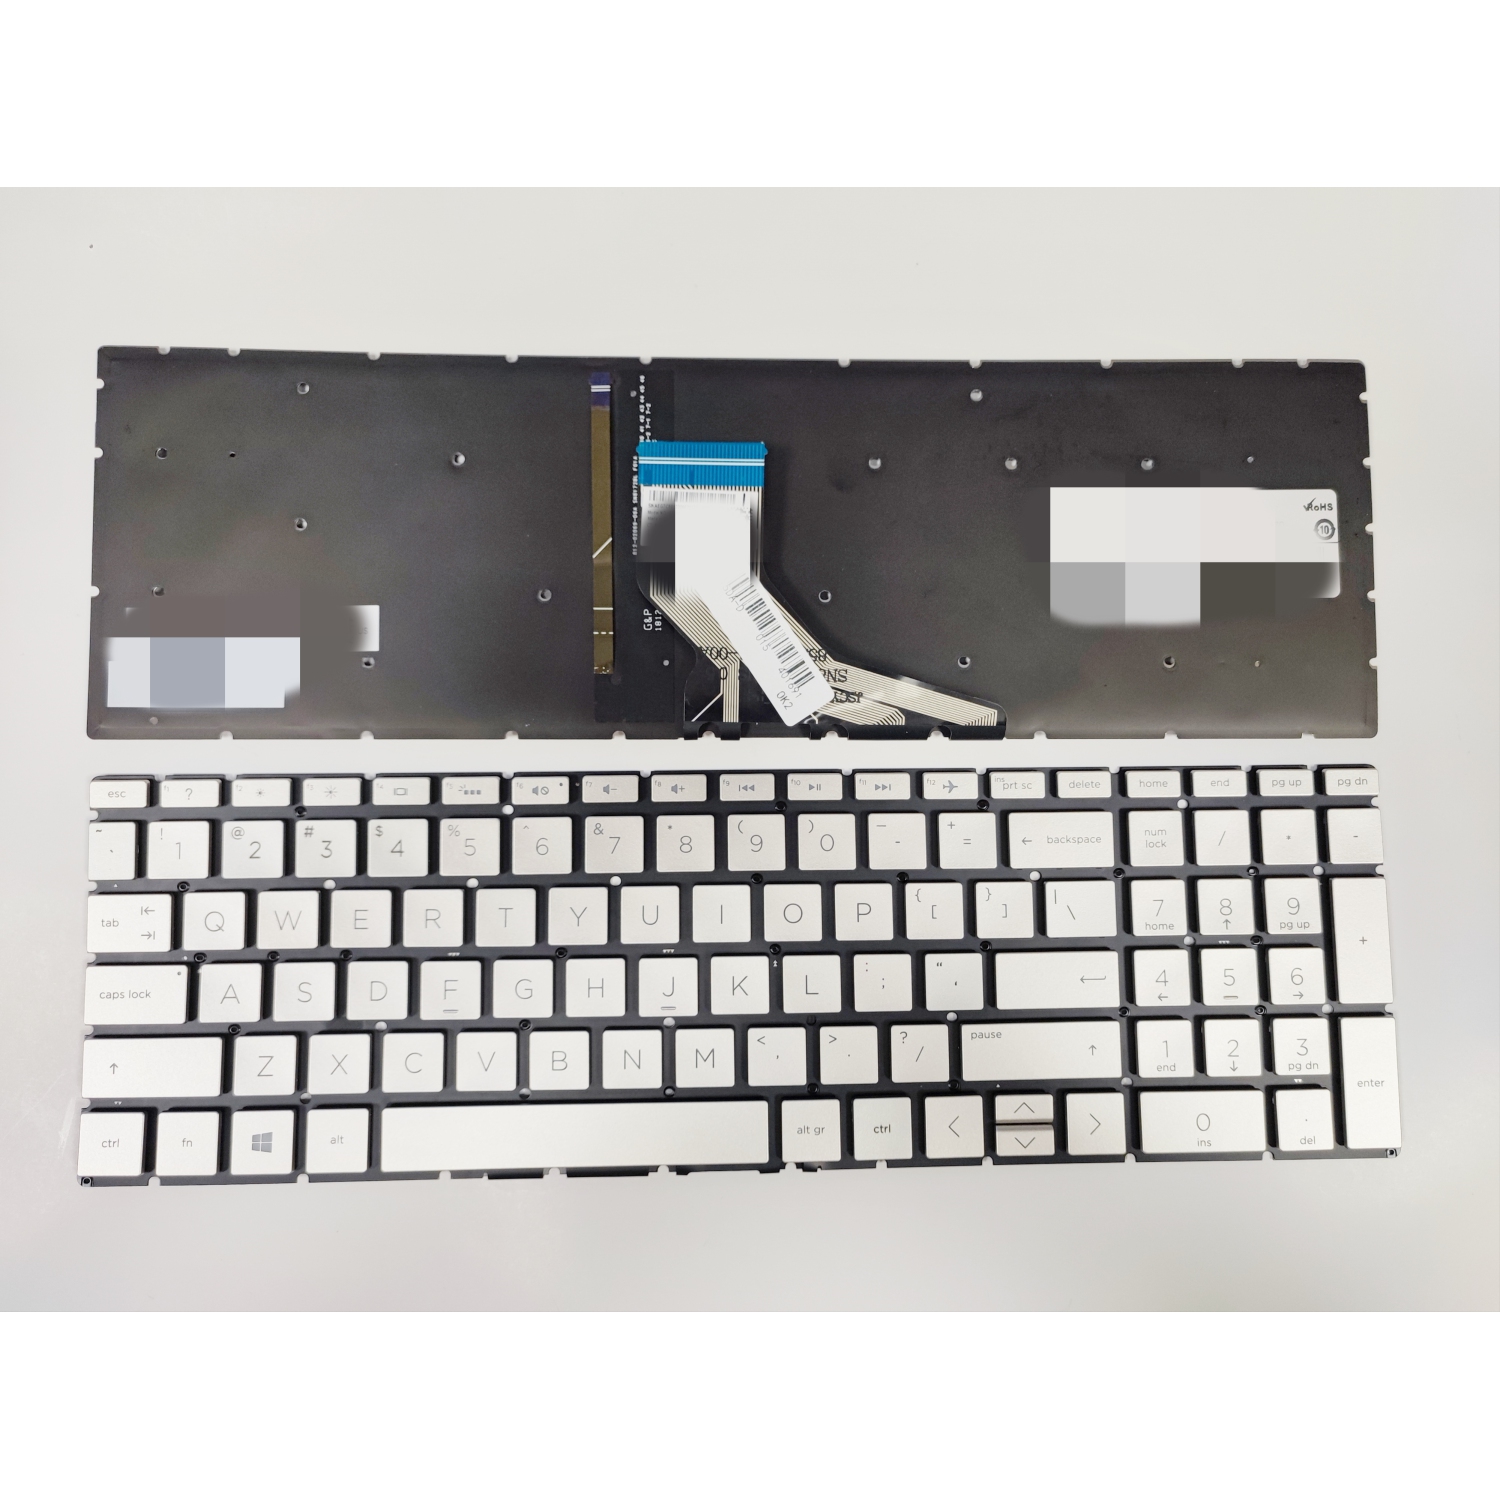 New Silver Backlit keyboard For HP 15-CN 15-CP 15-CS,15-EC 15-DA 15-DB 15-DF,15-DR 15-CN 15-CW 15-CR 15-CS 250 255 G7 17-CA,17-CD 17-BY TPN-C135, TPN-C136 Series US